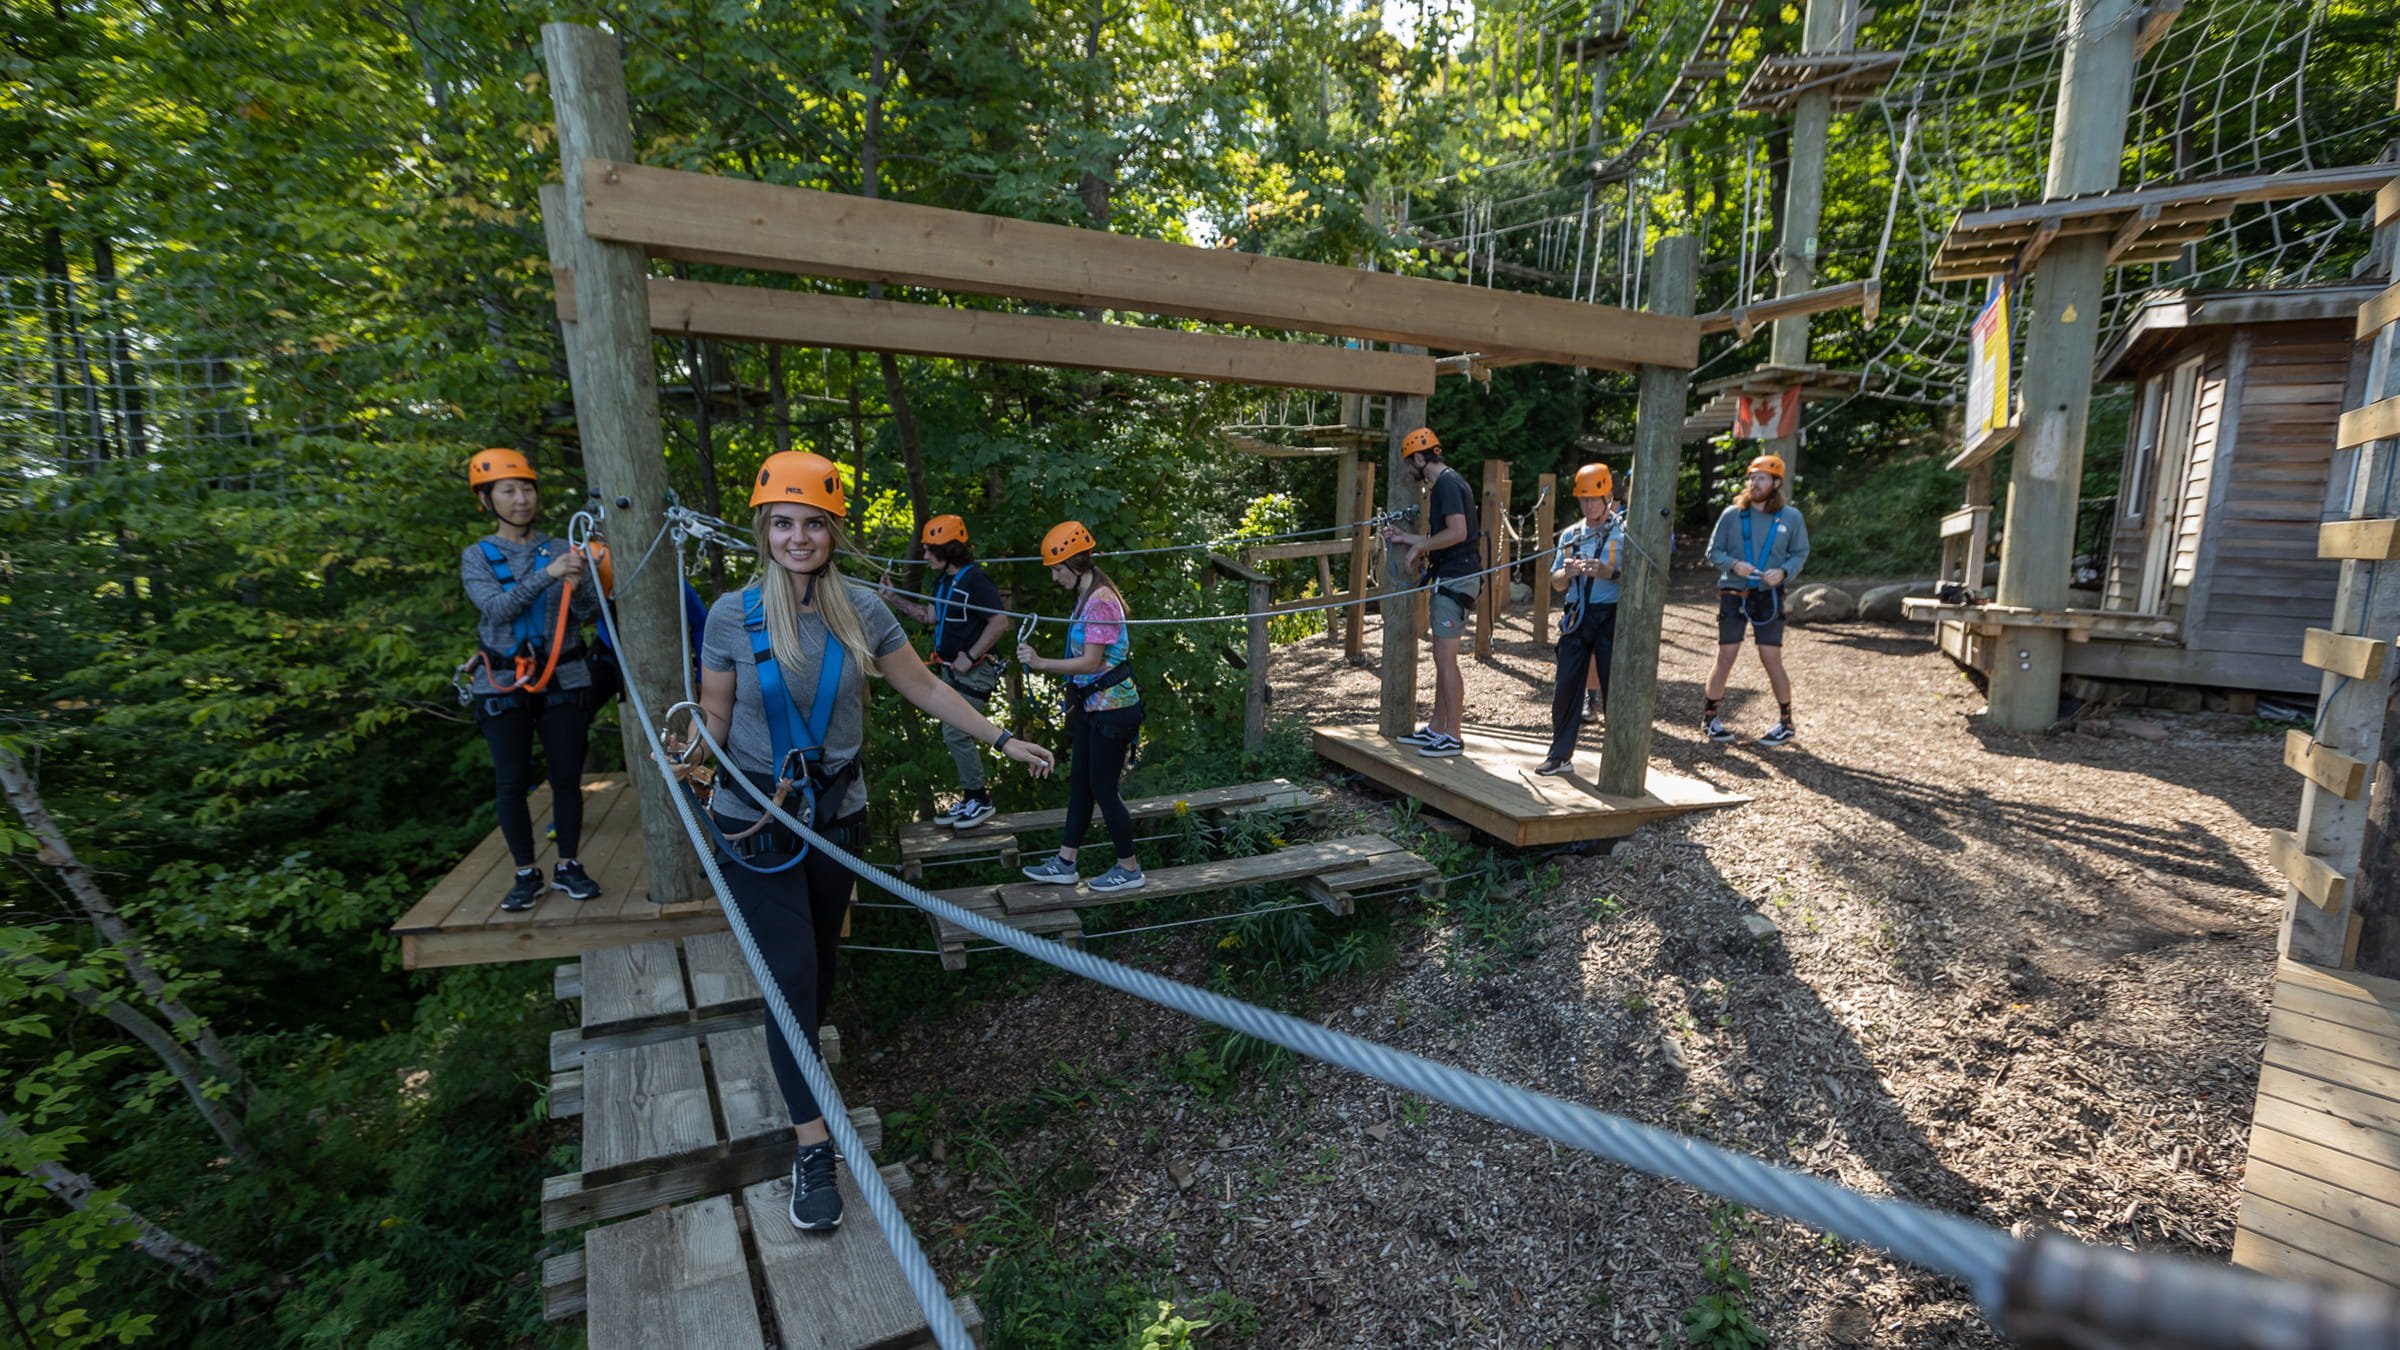 Group of people learning to use the ropes course at Timber Challenge High Ropes Course at Blue Mountain Resort